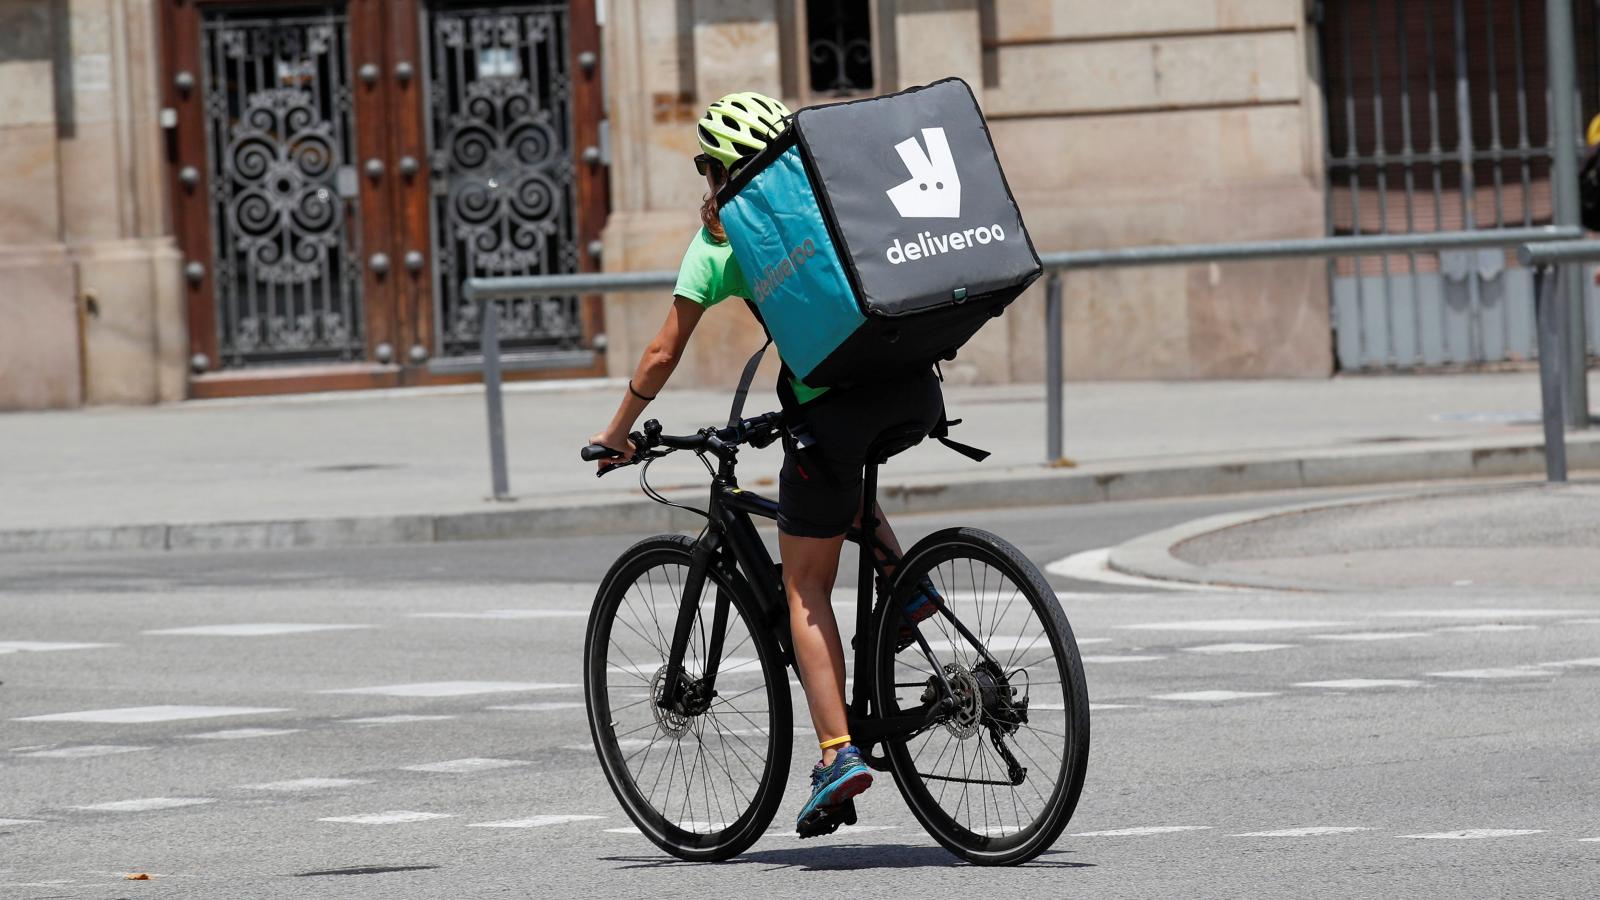 Deliveroo Share Price Up 15% - Time To Buy Deliveroo ...